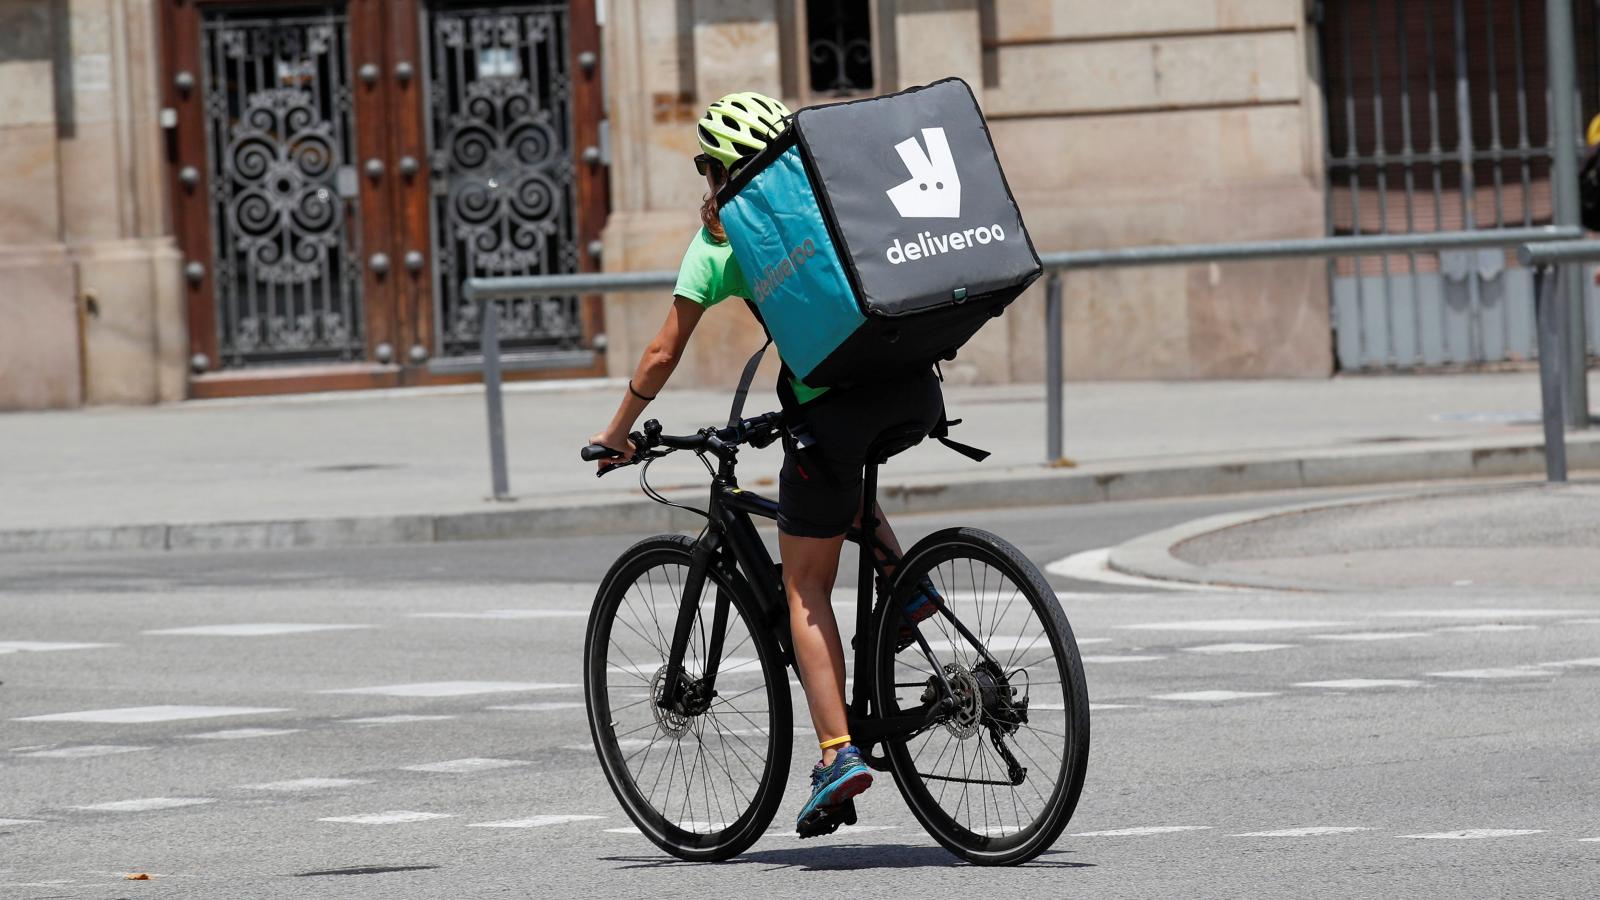 Deliveroo Share Price Up 15% - Time To Buy Deliveroo ...